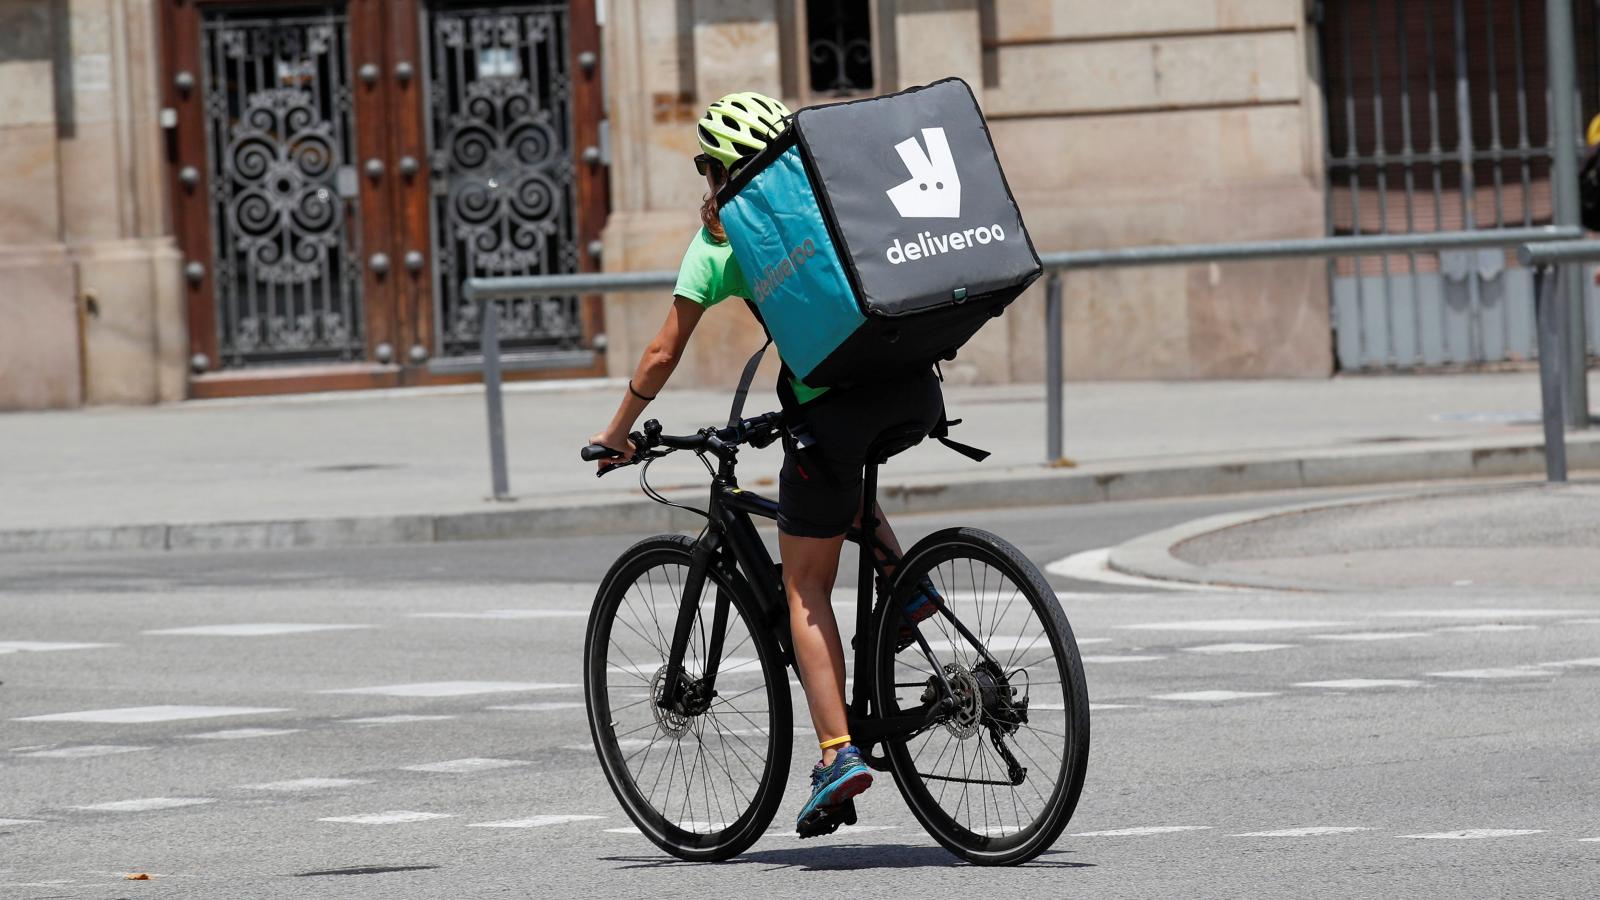 Deliveroo Share Price Up 15% - Time To Buy Deliveroo ...